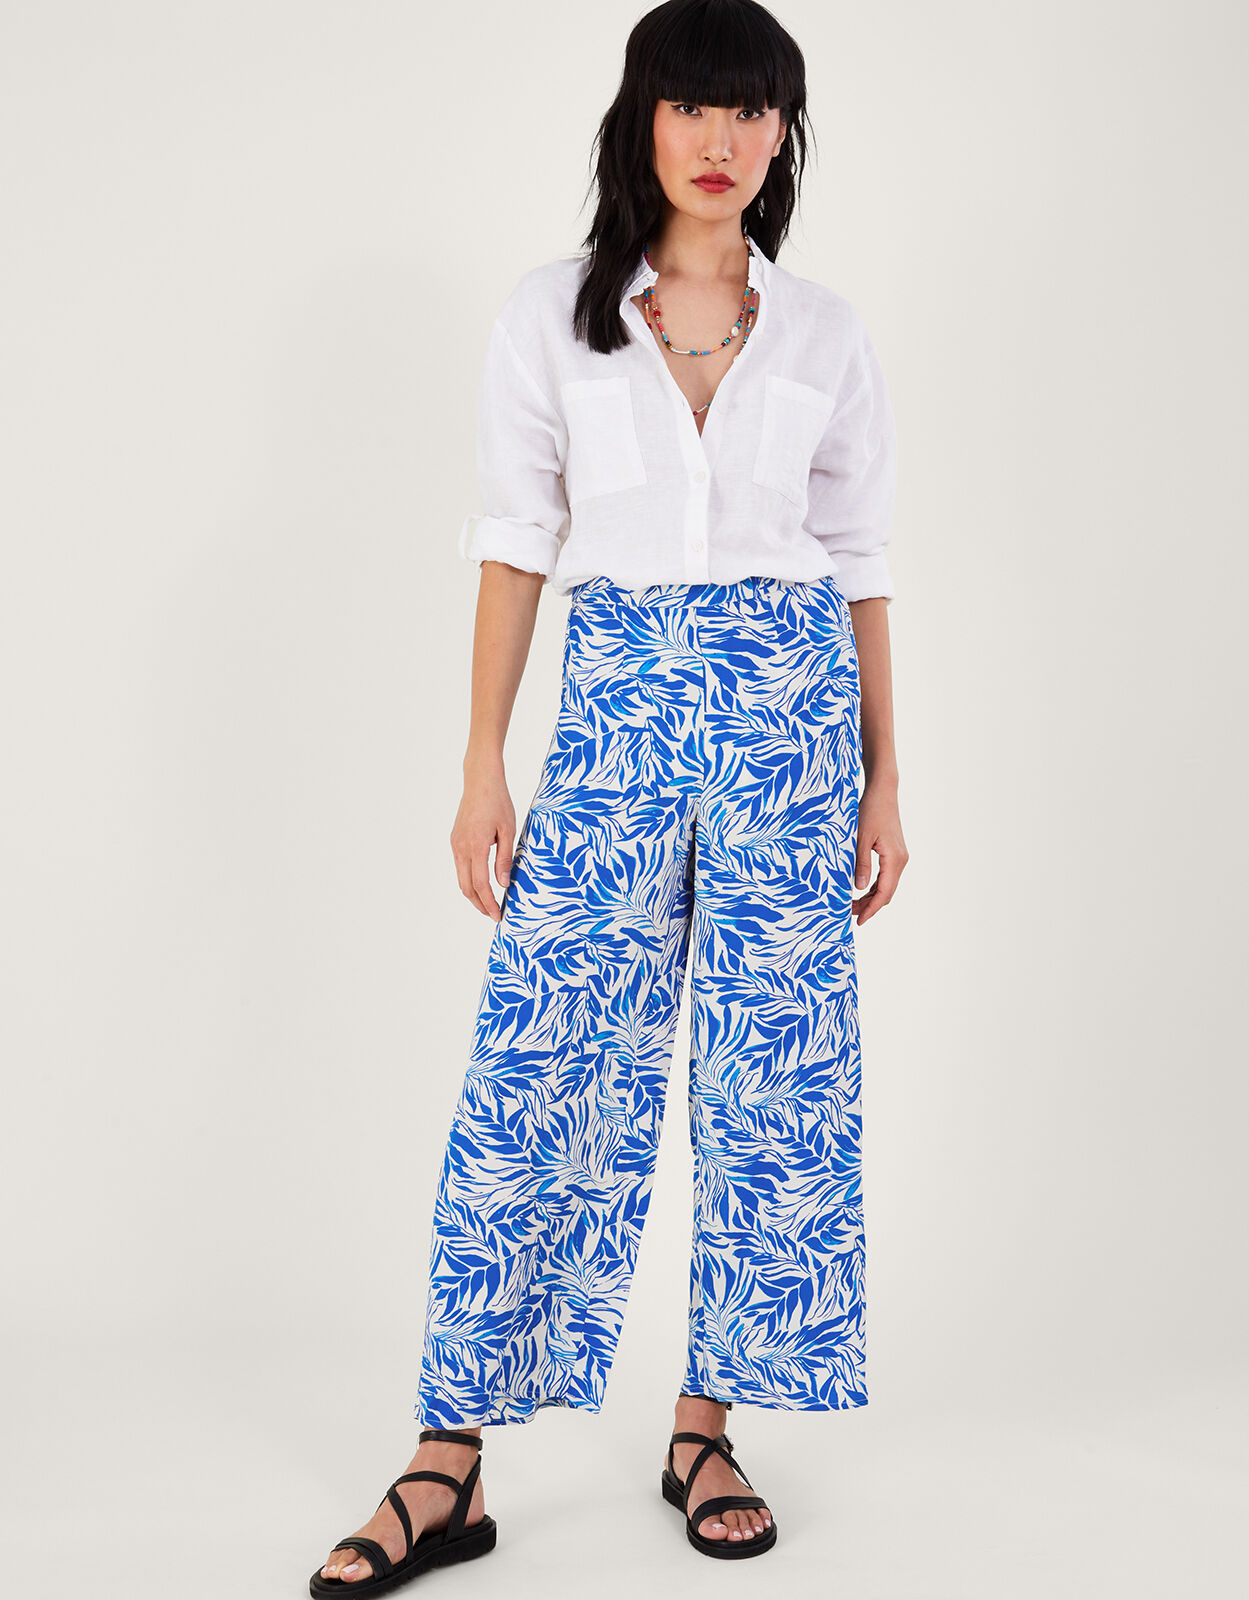 Printed Trousers for Women  Print Trousers  Next Official Site